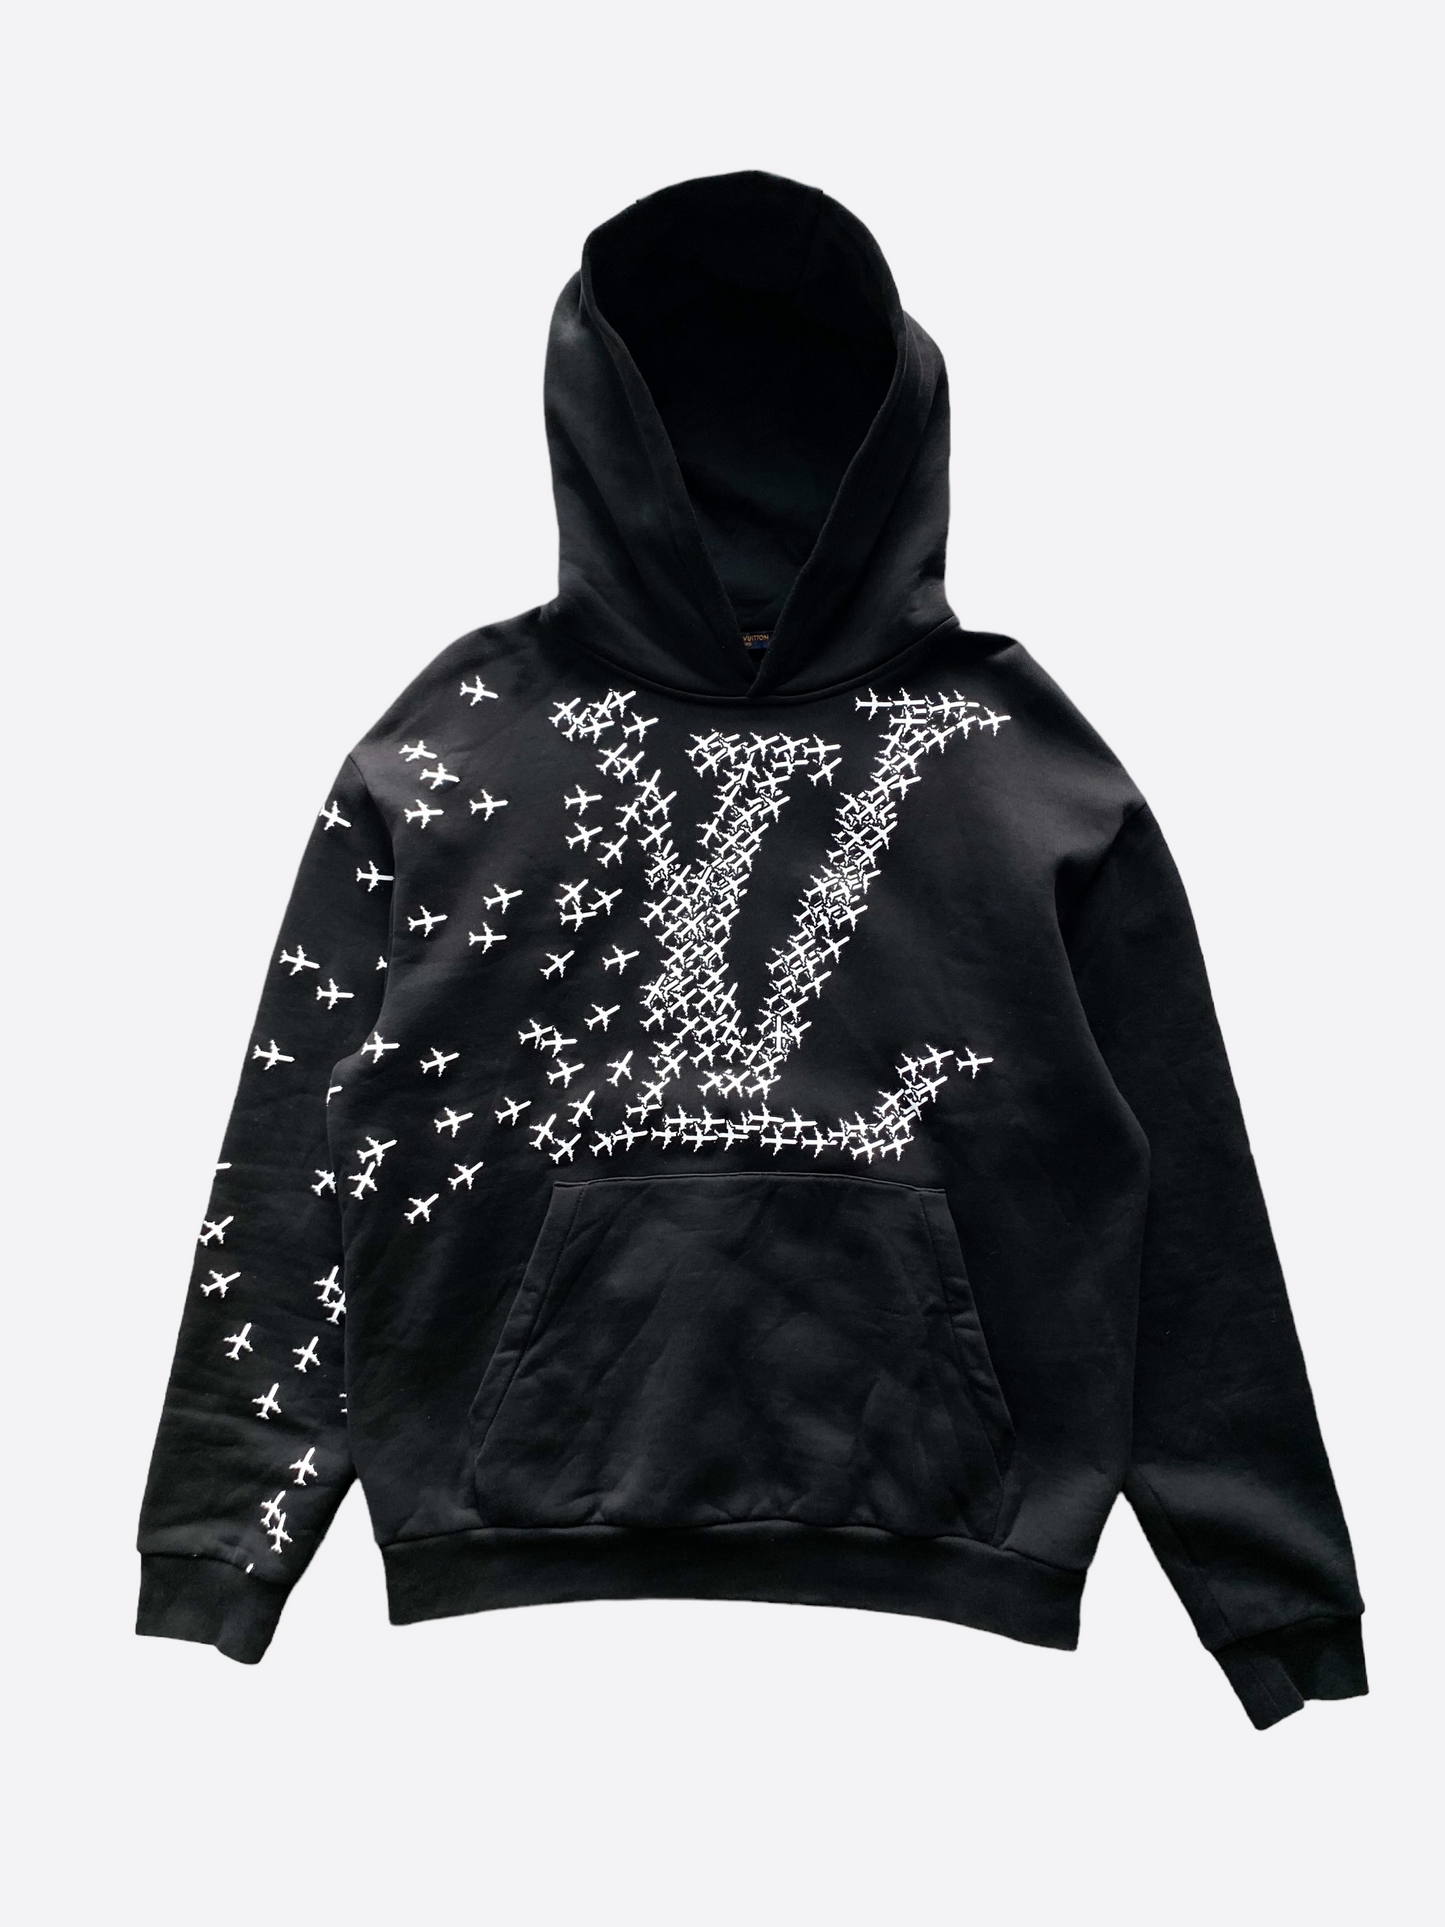 LV Planes Hoodie Size L/XL for Sale in Chicago, IL - OfferUp